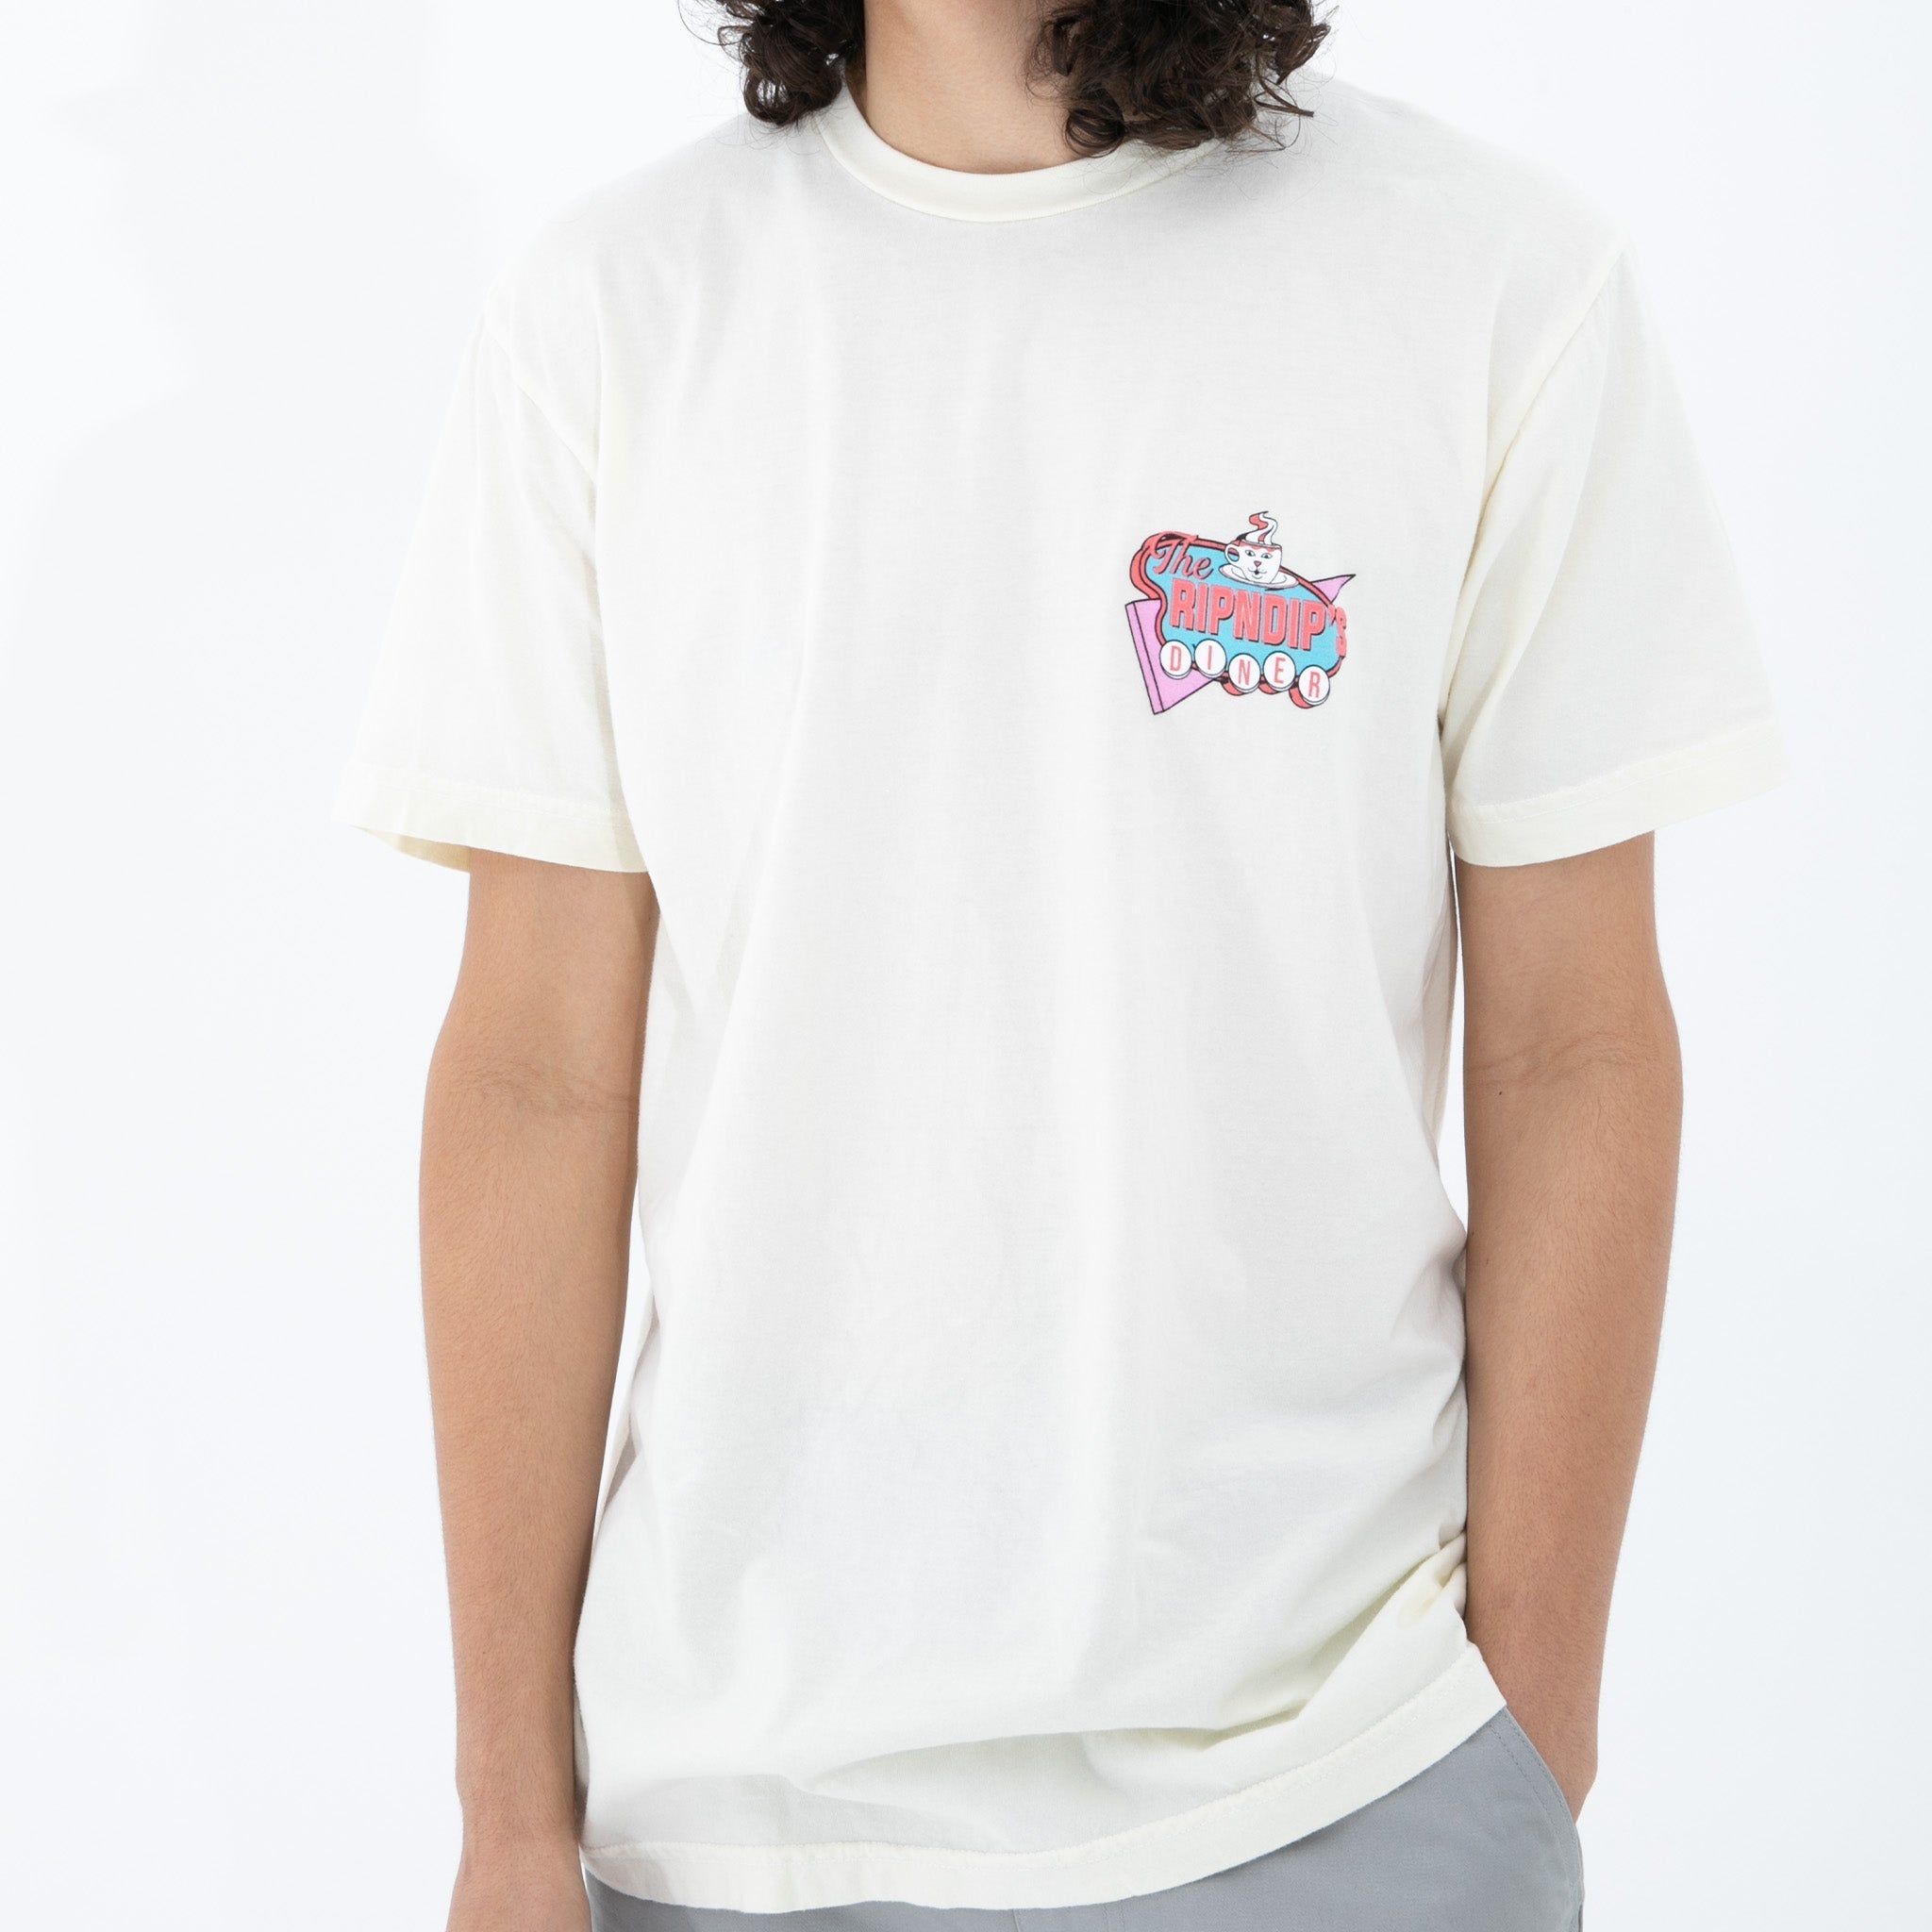 Nerms Diner Tee (Natural)